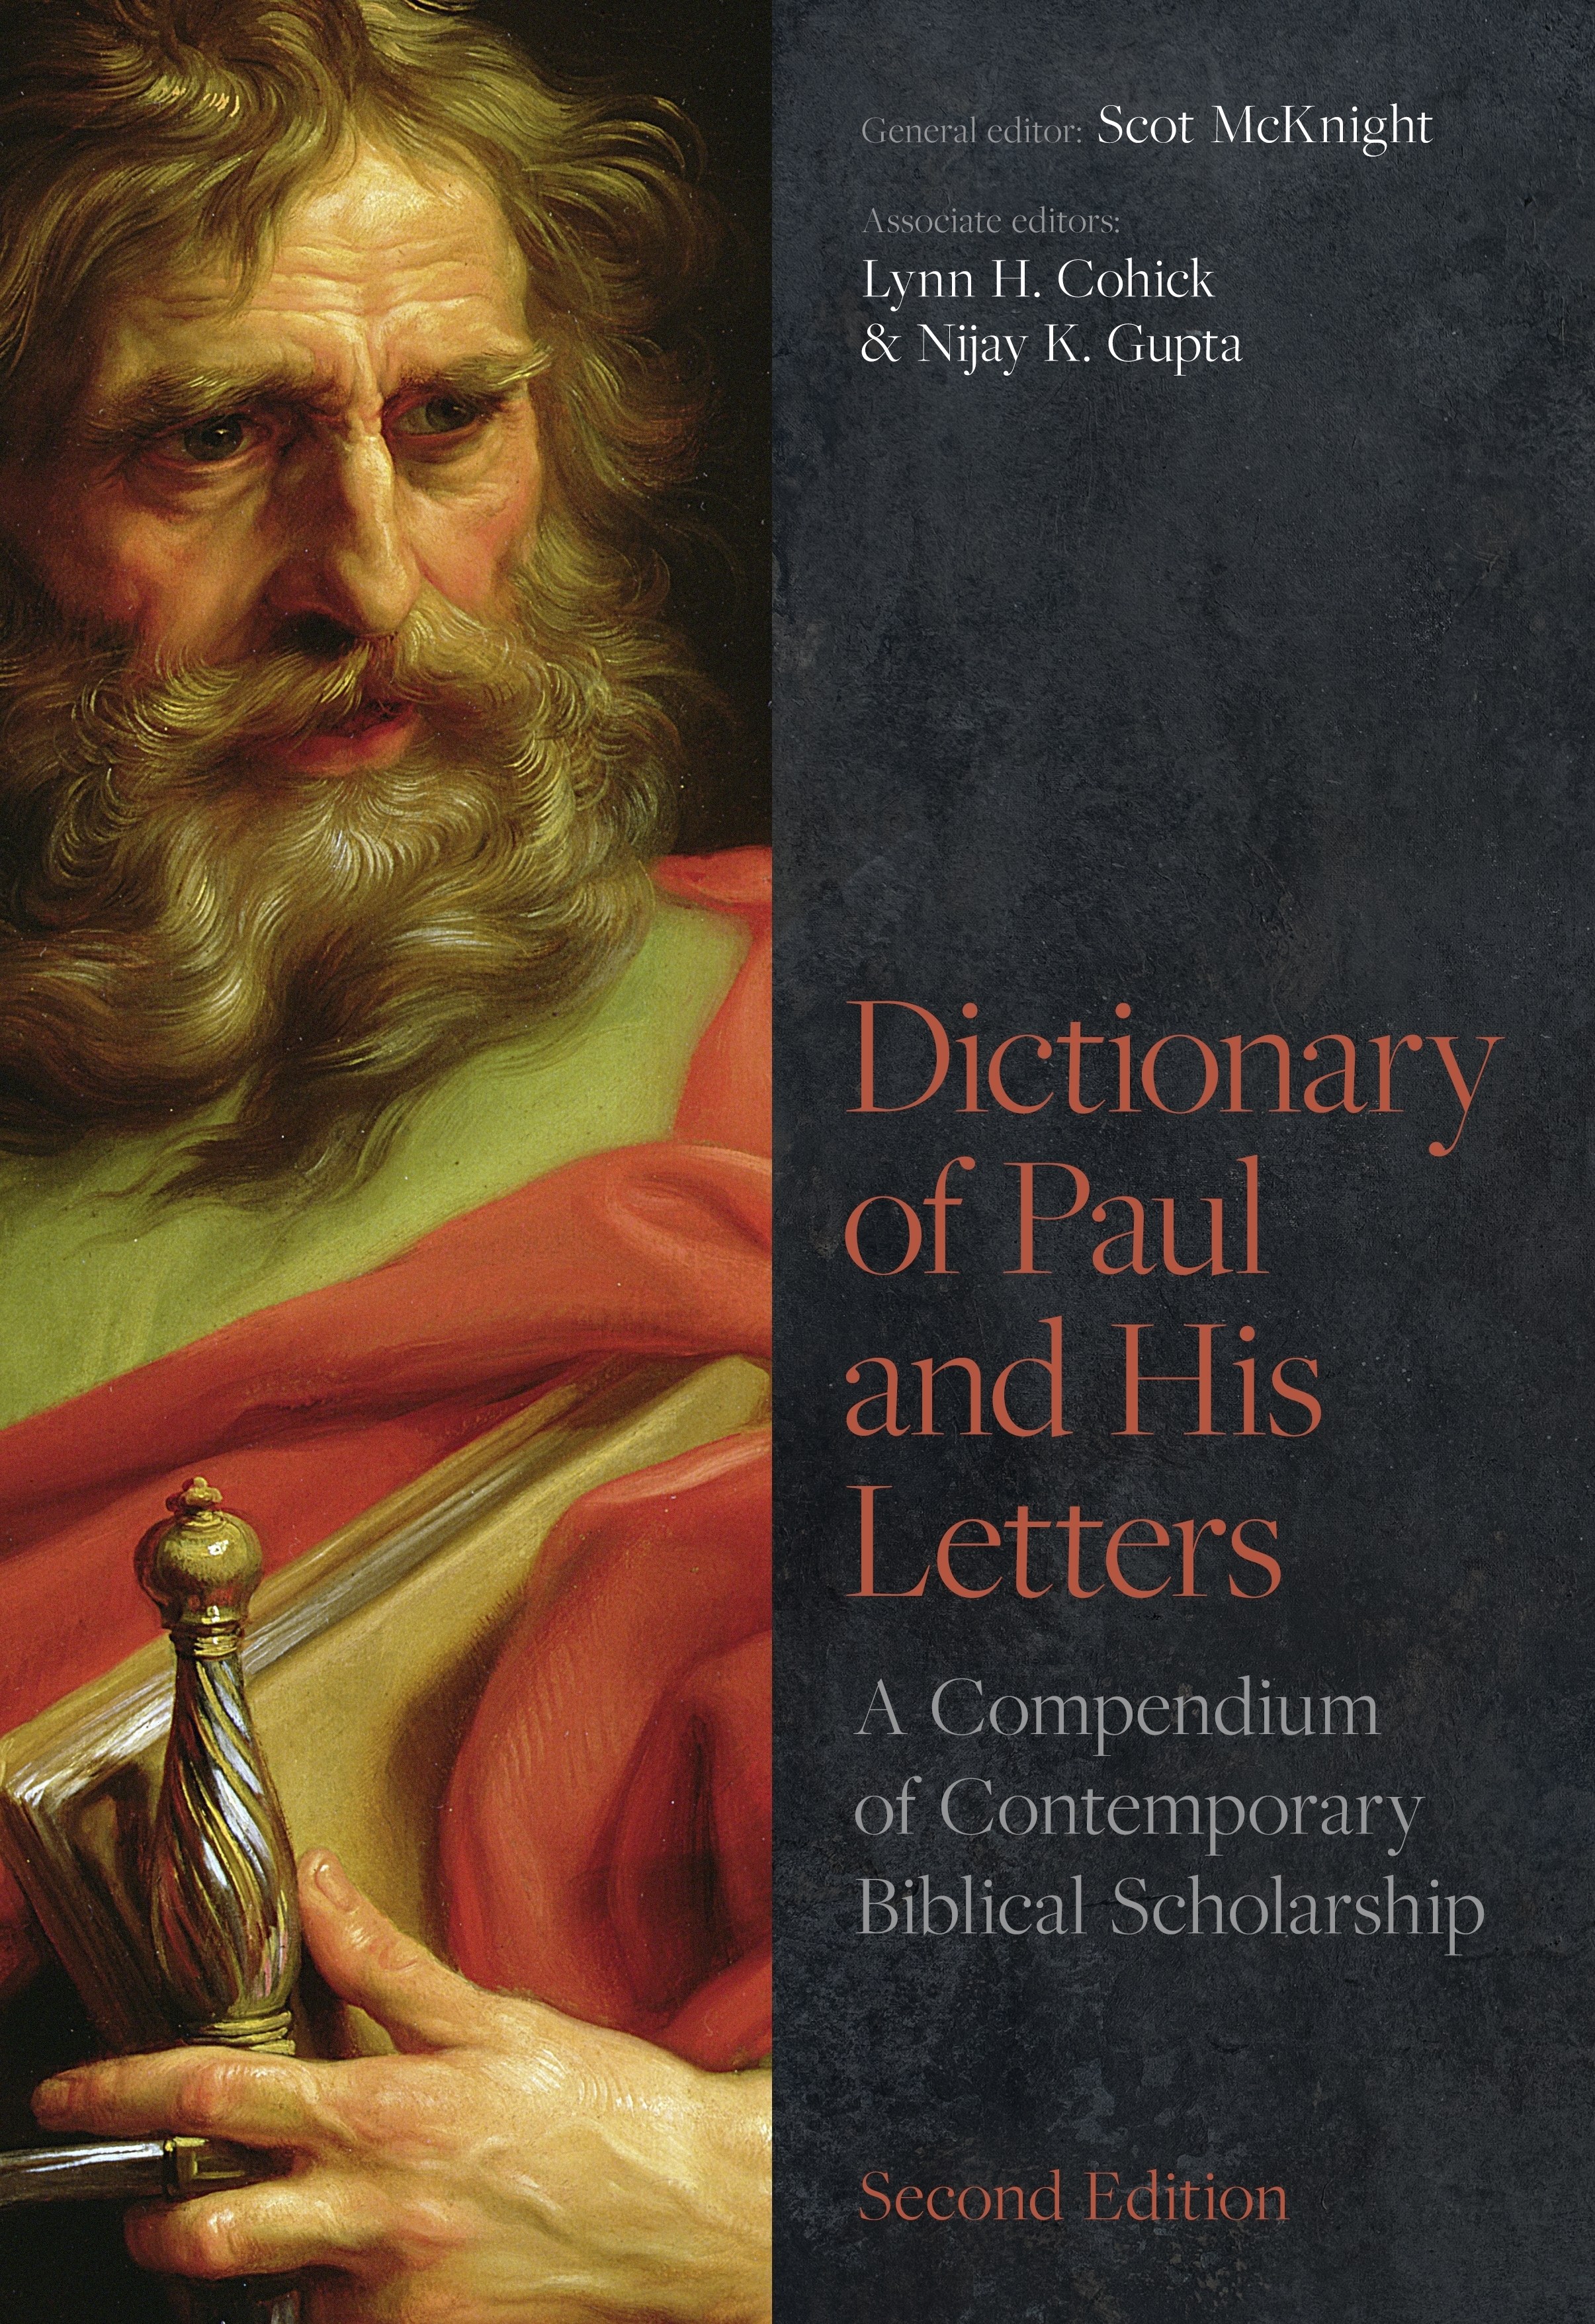 Dictionary of Paul and His Letters (2nd edn)